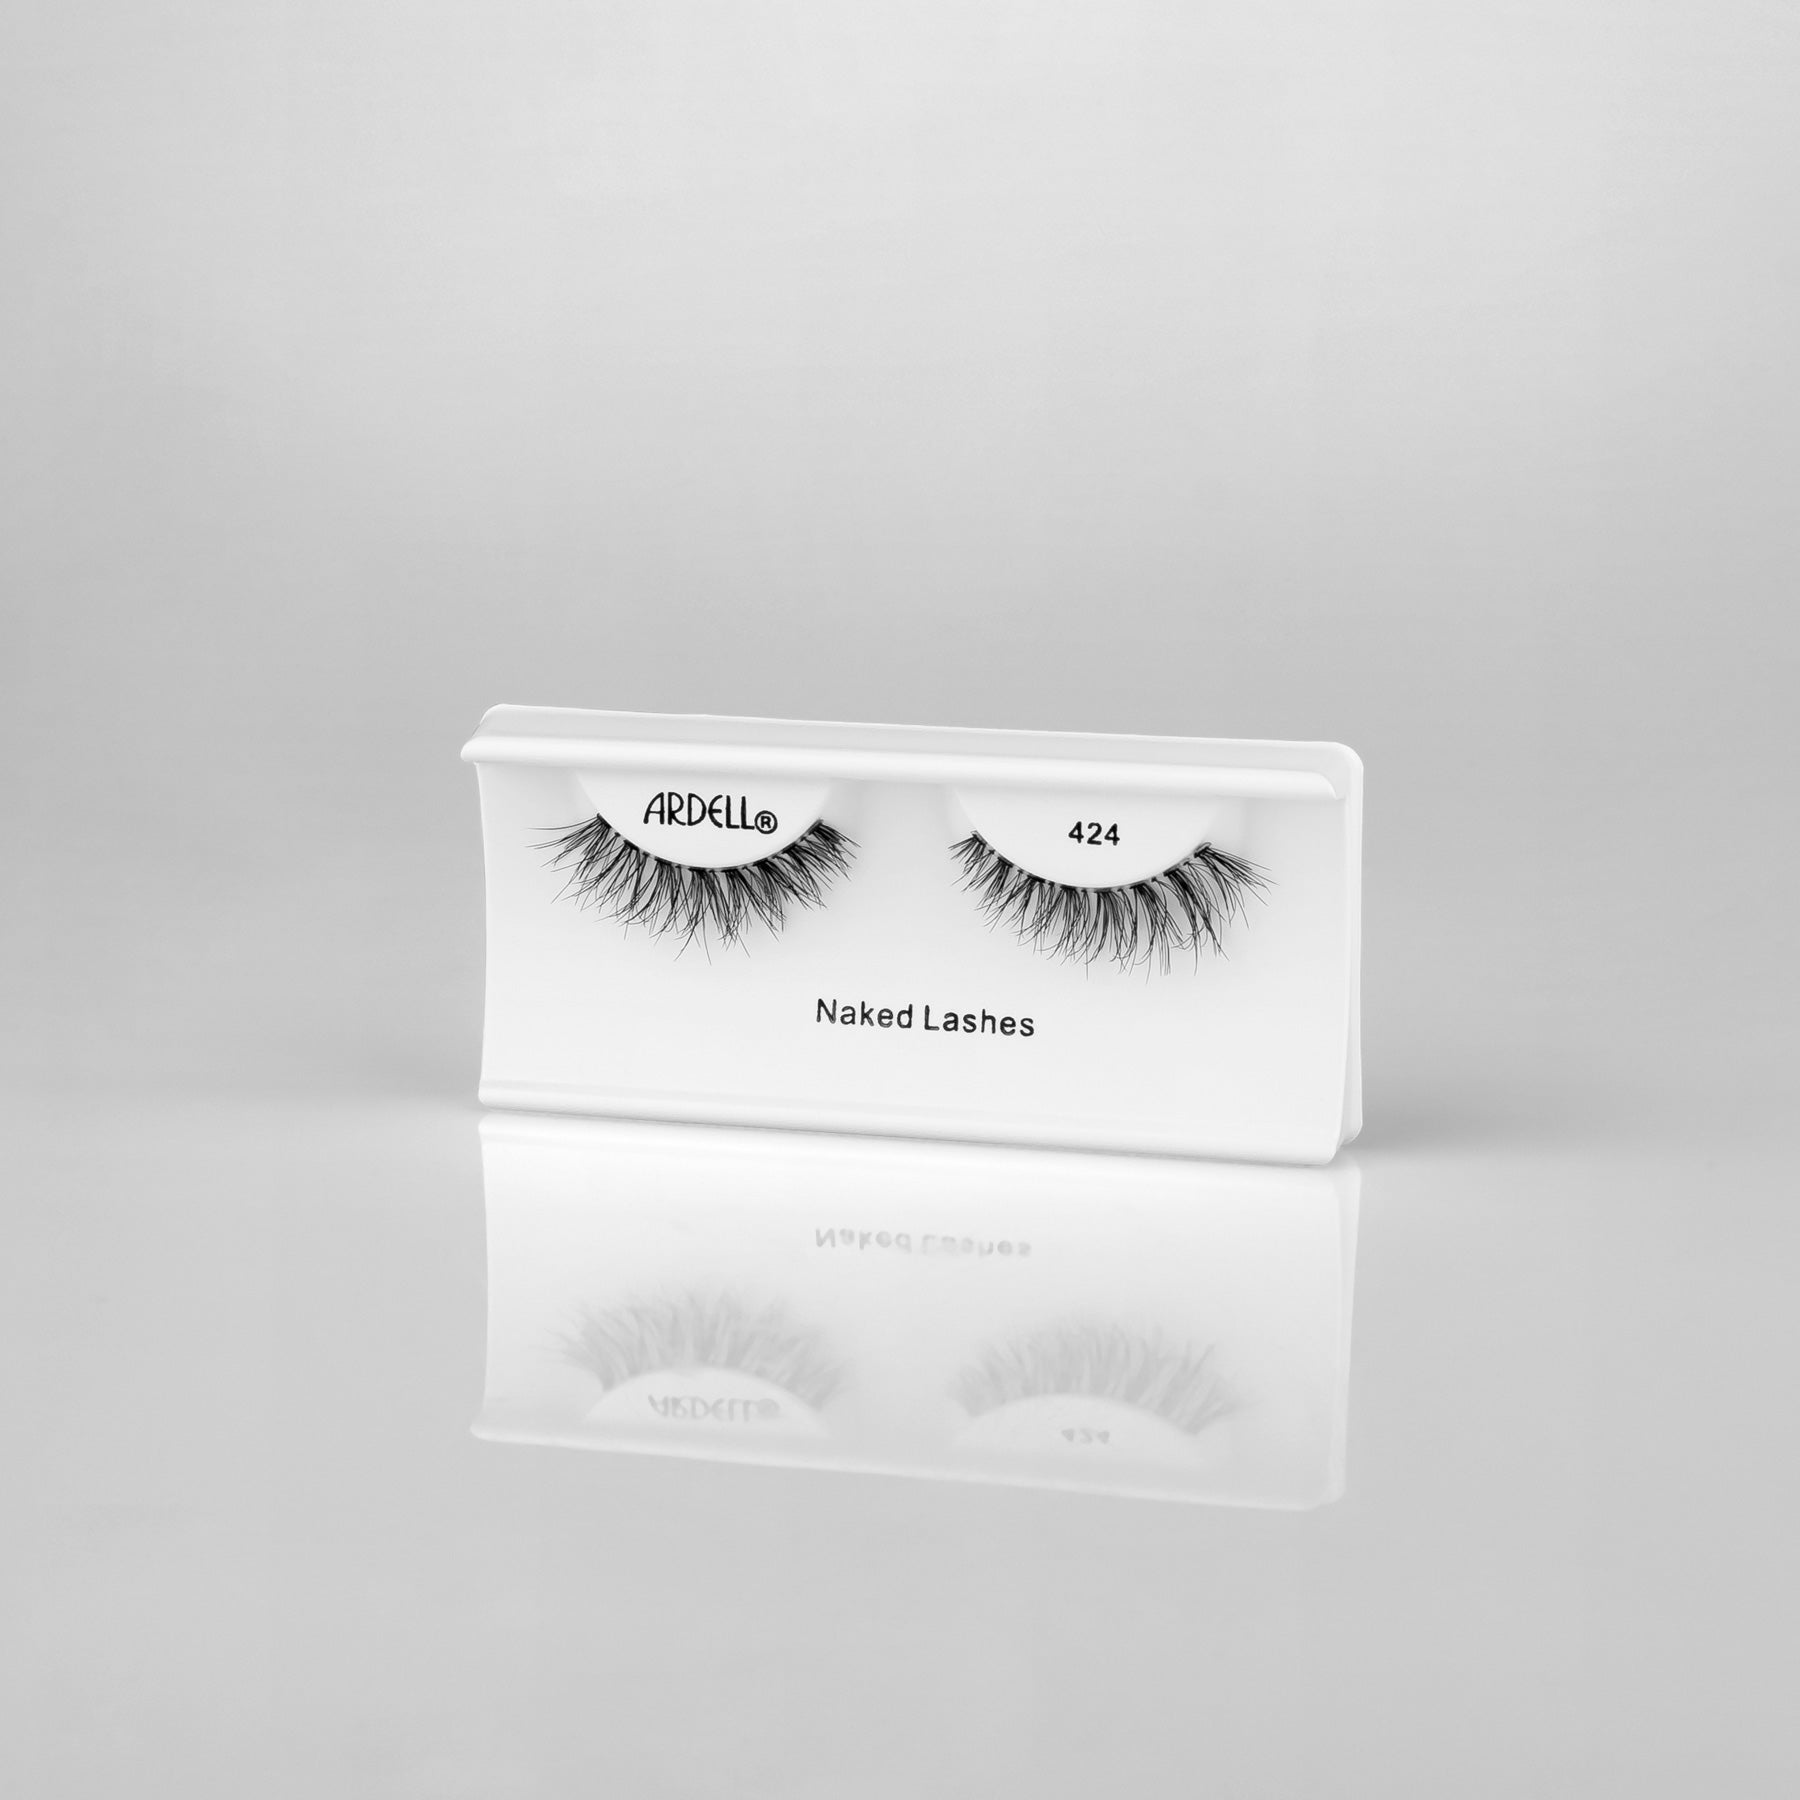 ARDELL Naked Lashes 424